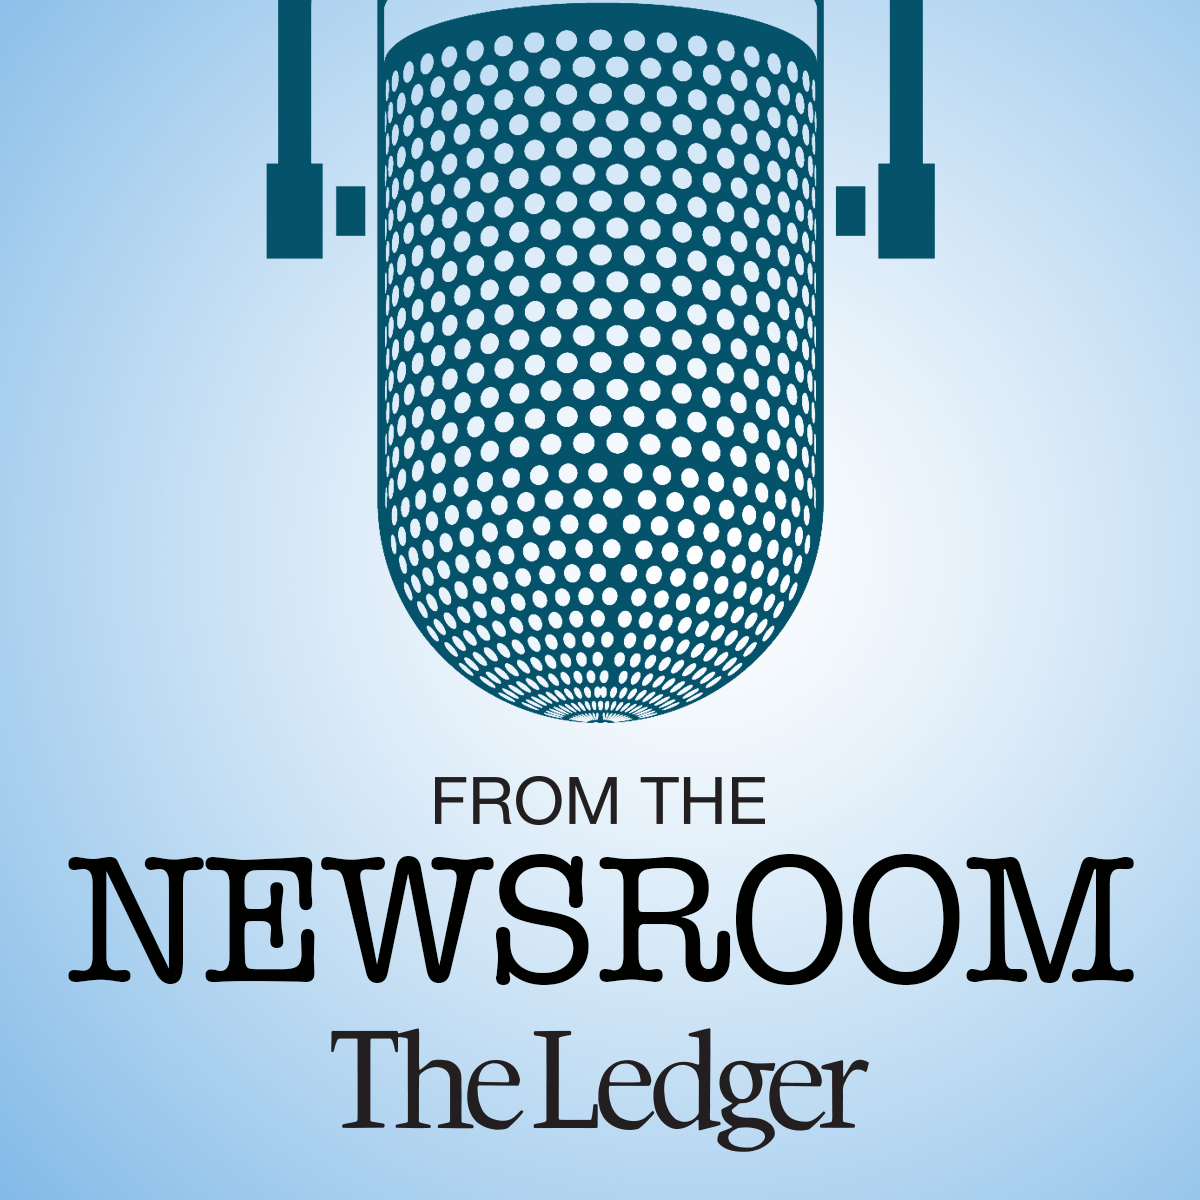 December 4, 2009: 40-minute interview with DeeDee Moore at The Ledger